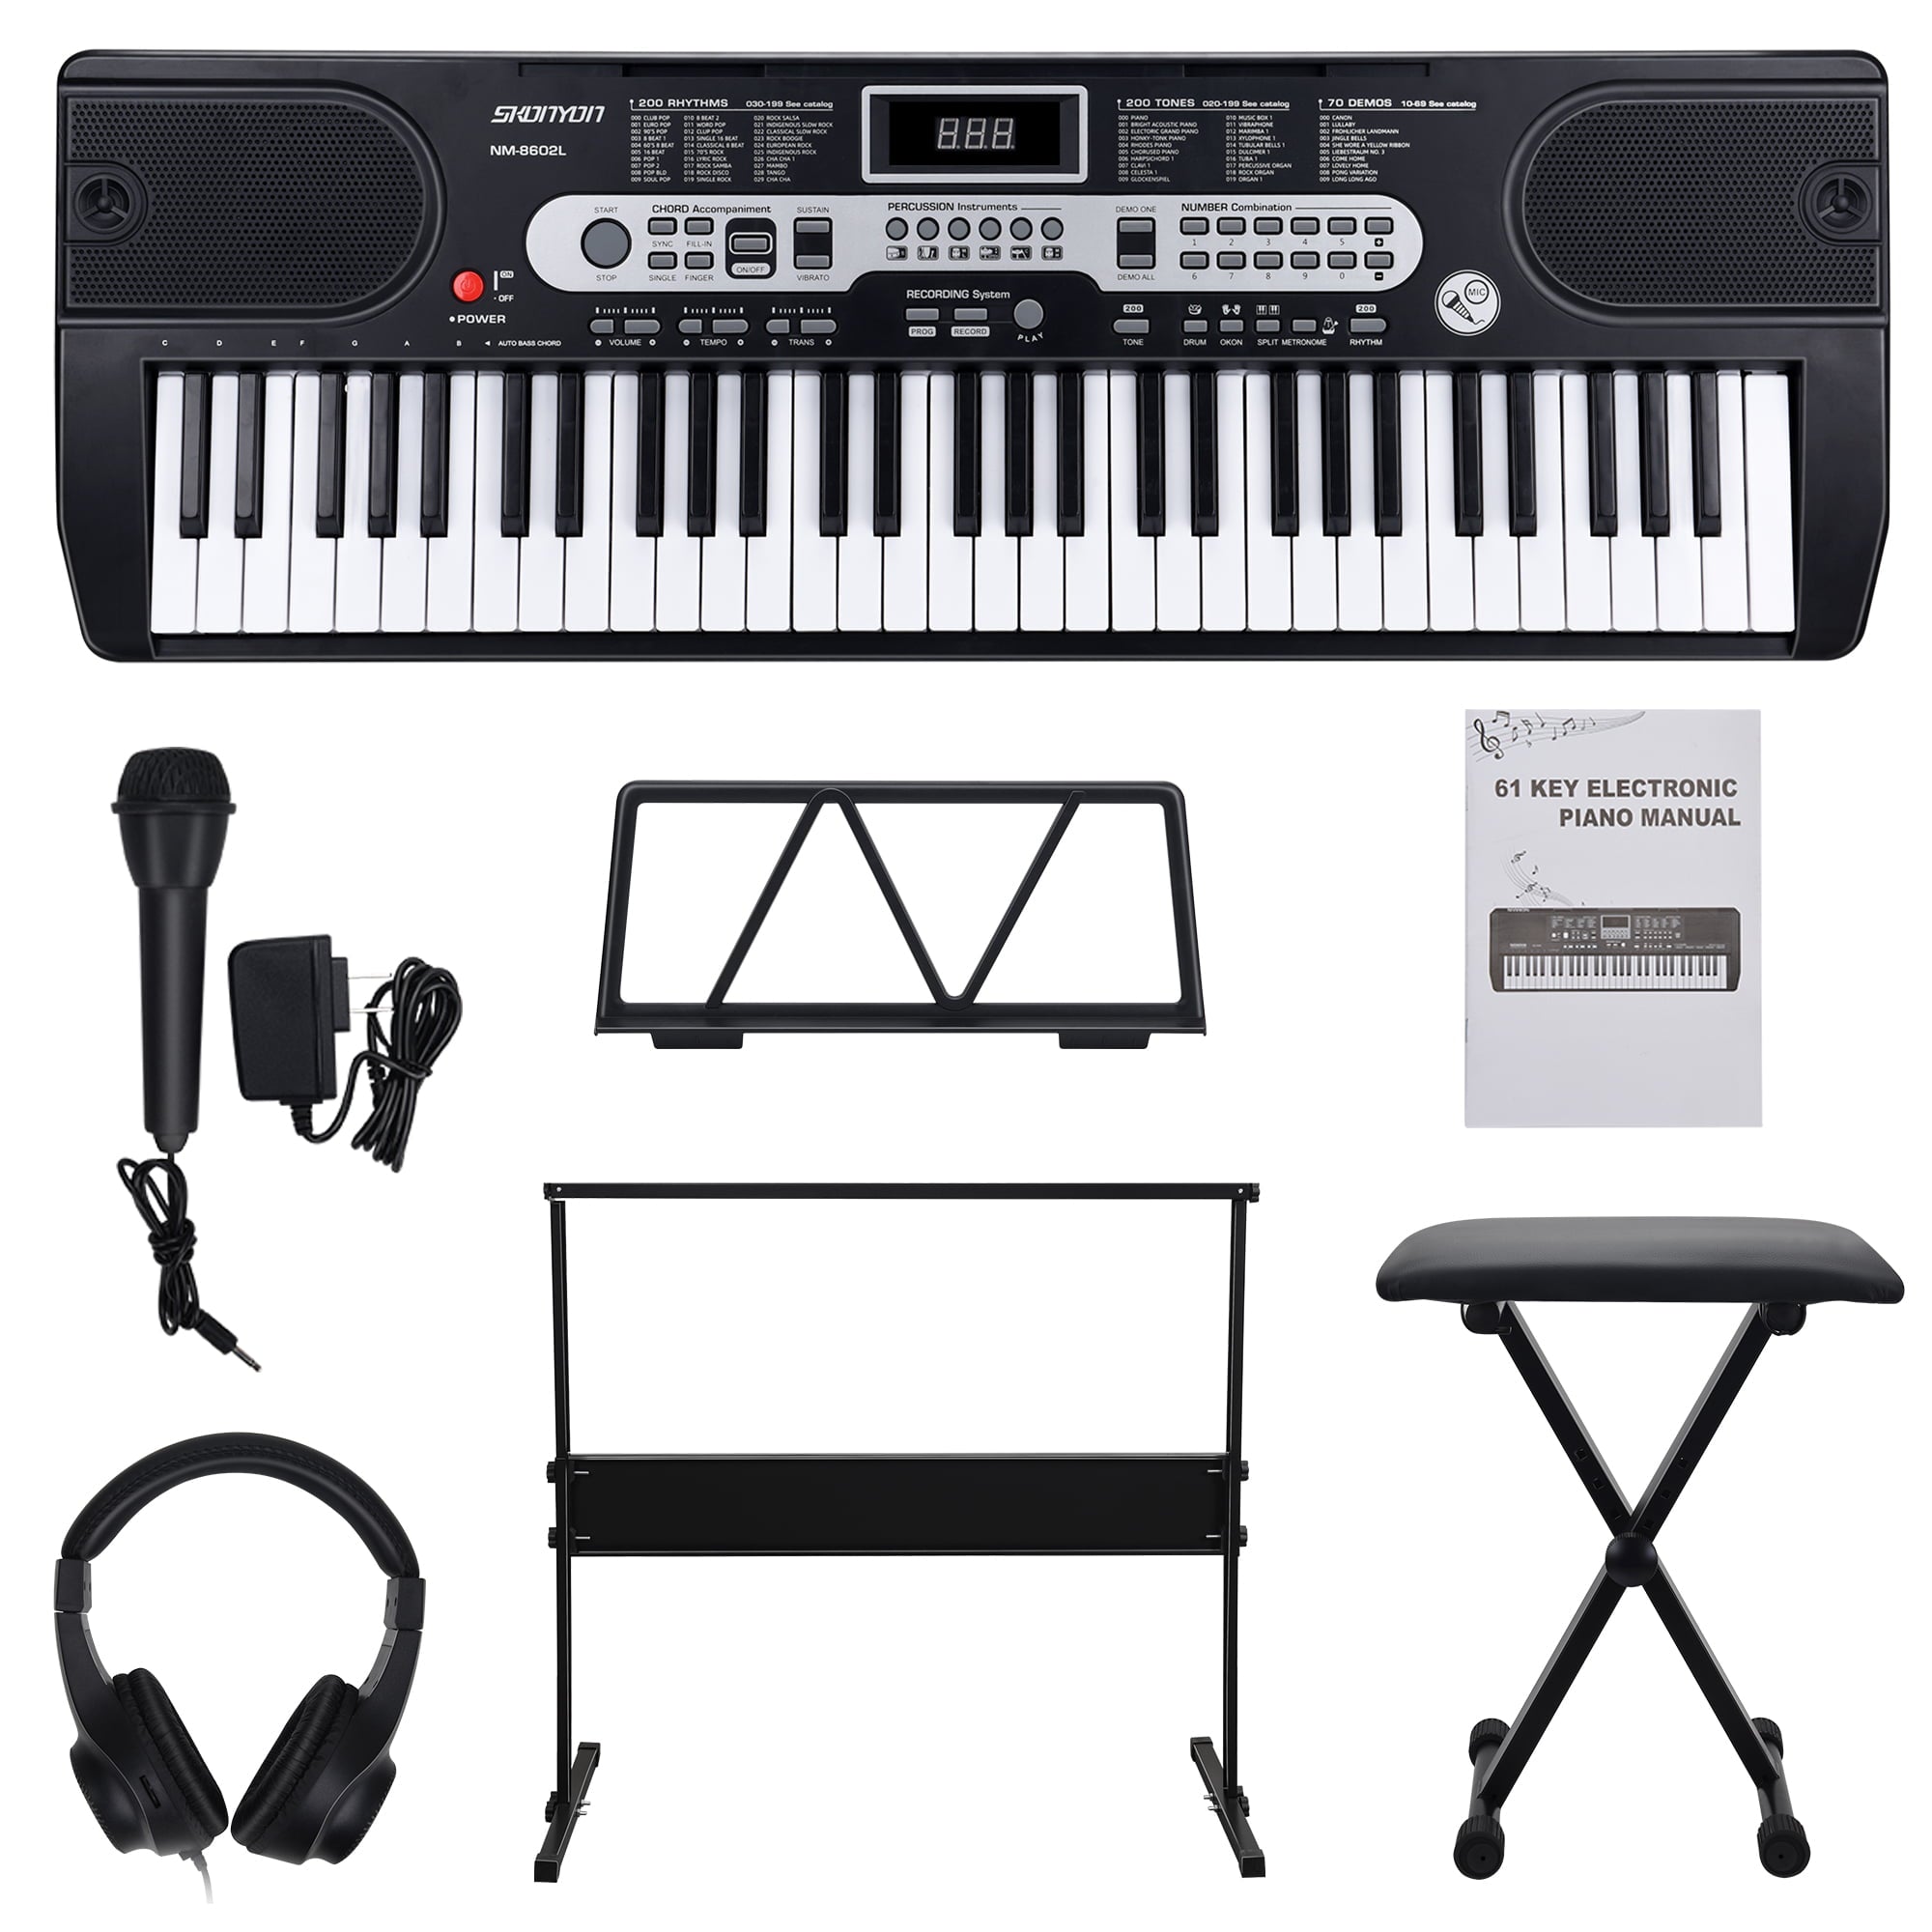 SUGIFT 61 Keys Keyboard Piano Set with Lighted Keys, Portable Electronic Piano Keyboard for Beginners